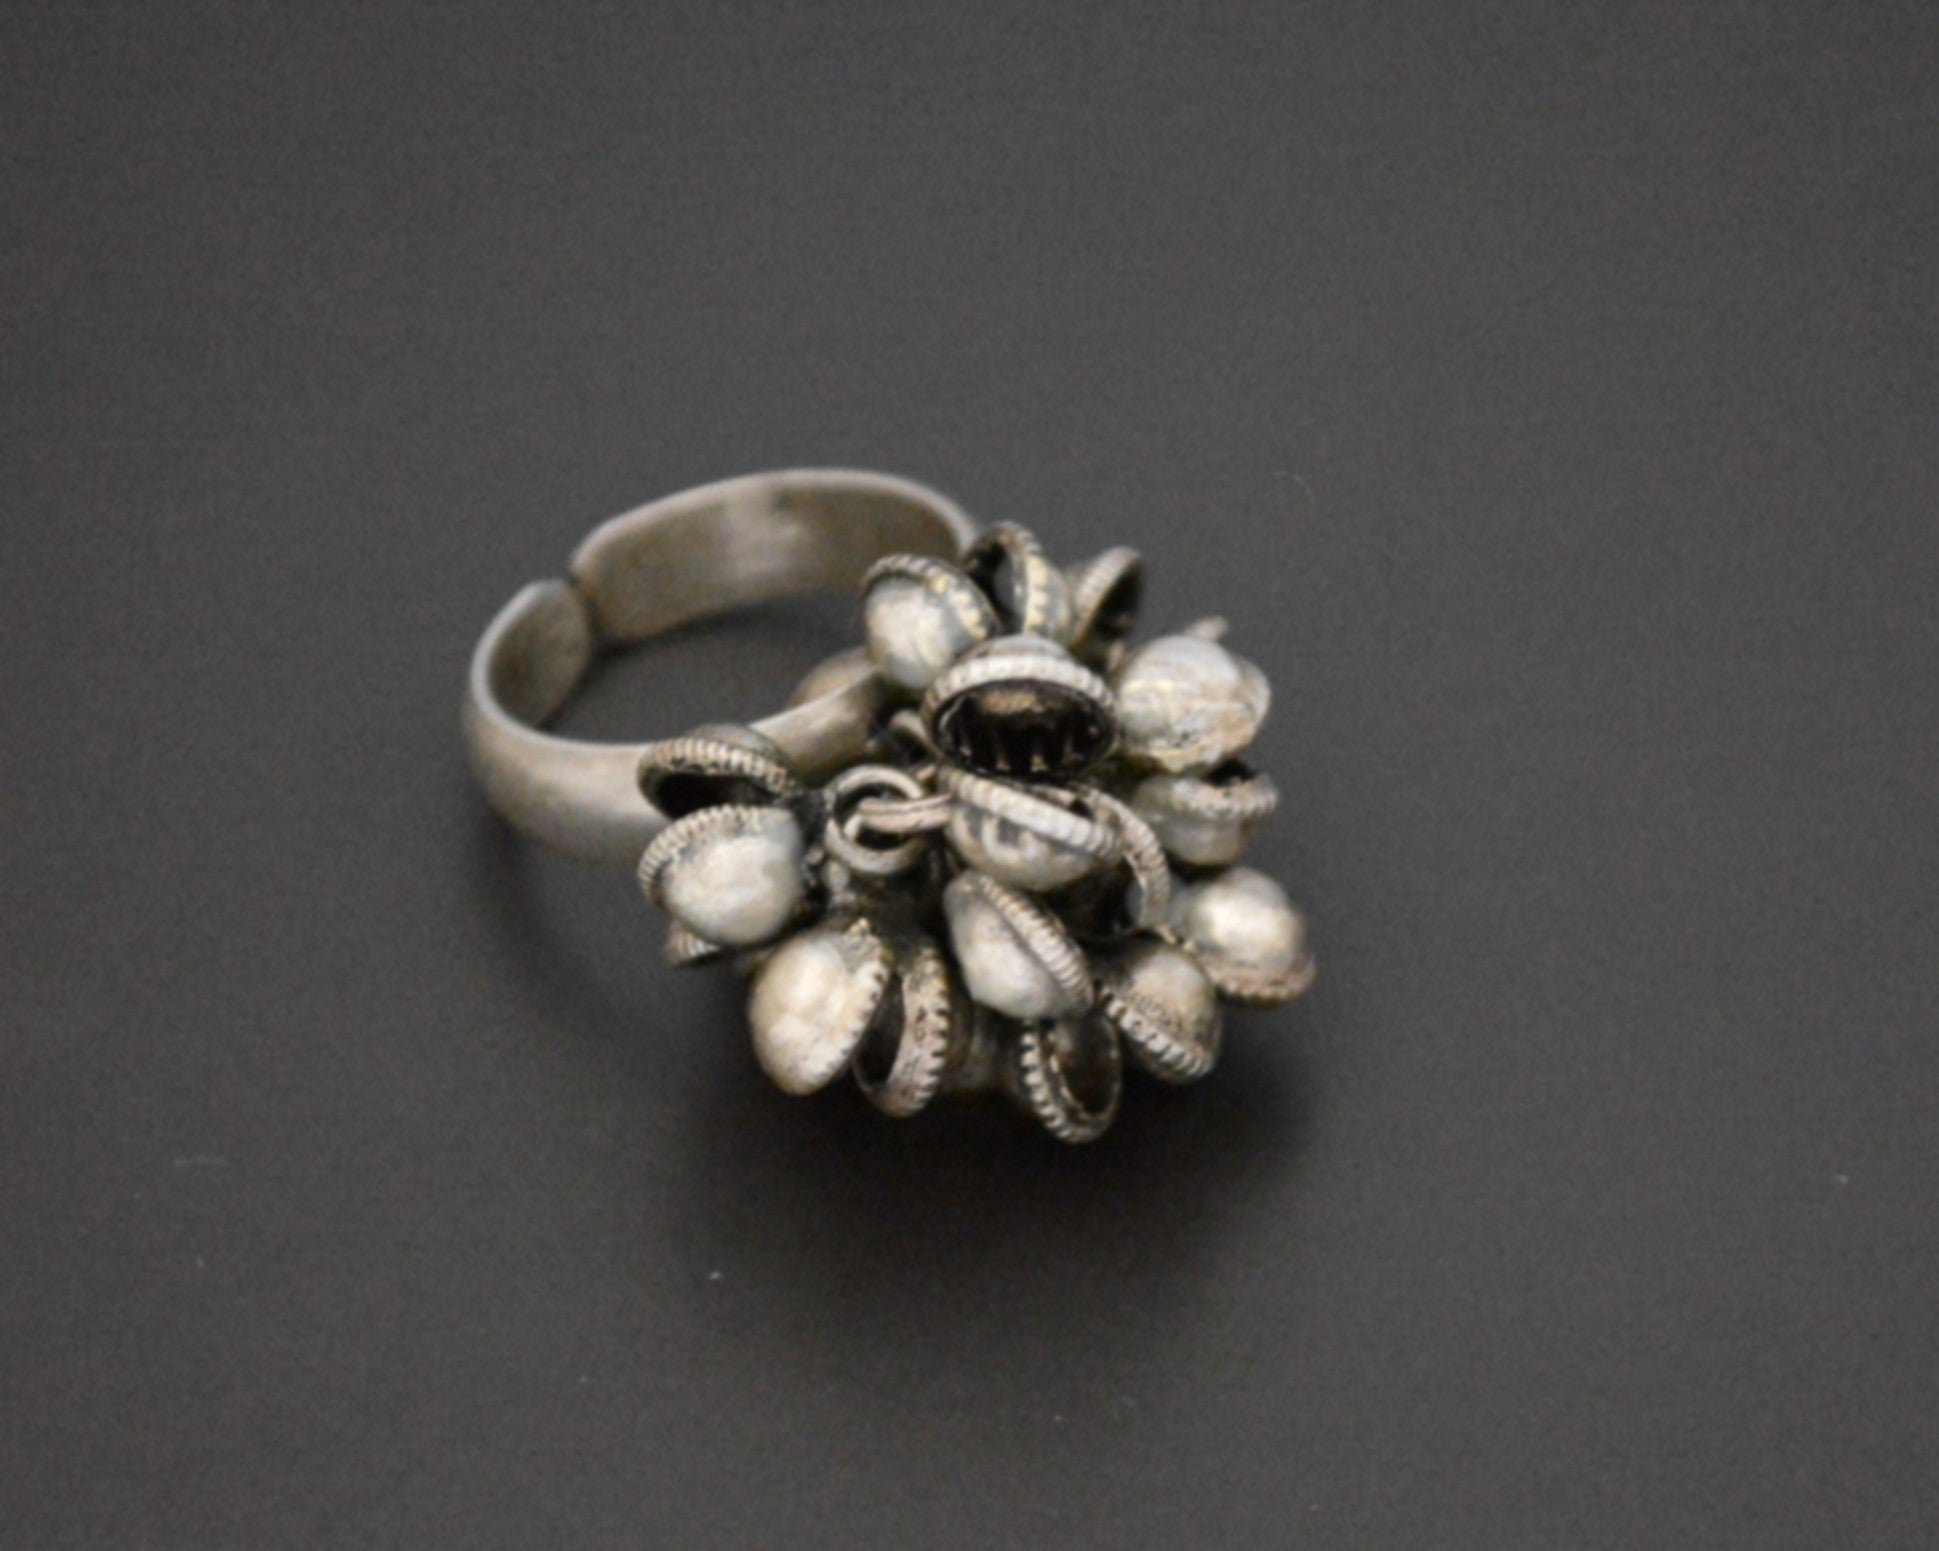 Rajasthani Silver Ring with Bells- Size 8